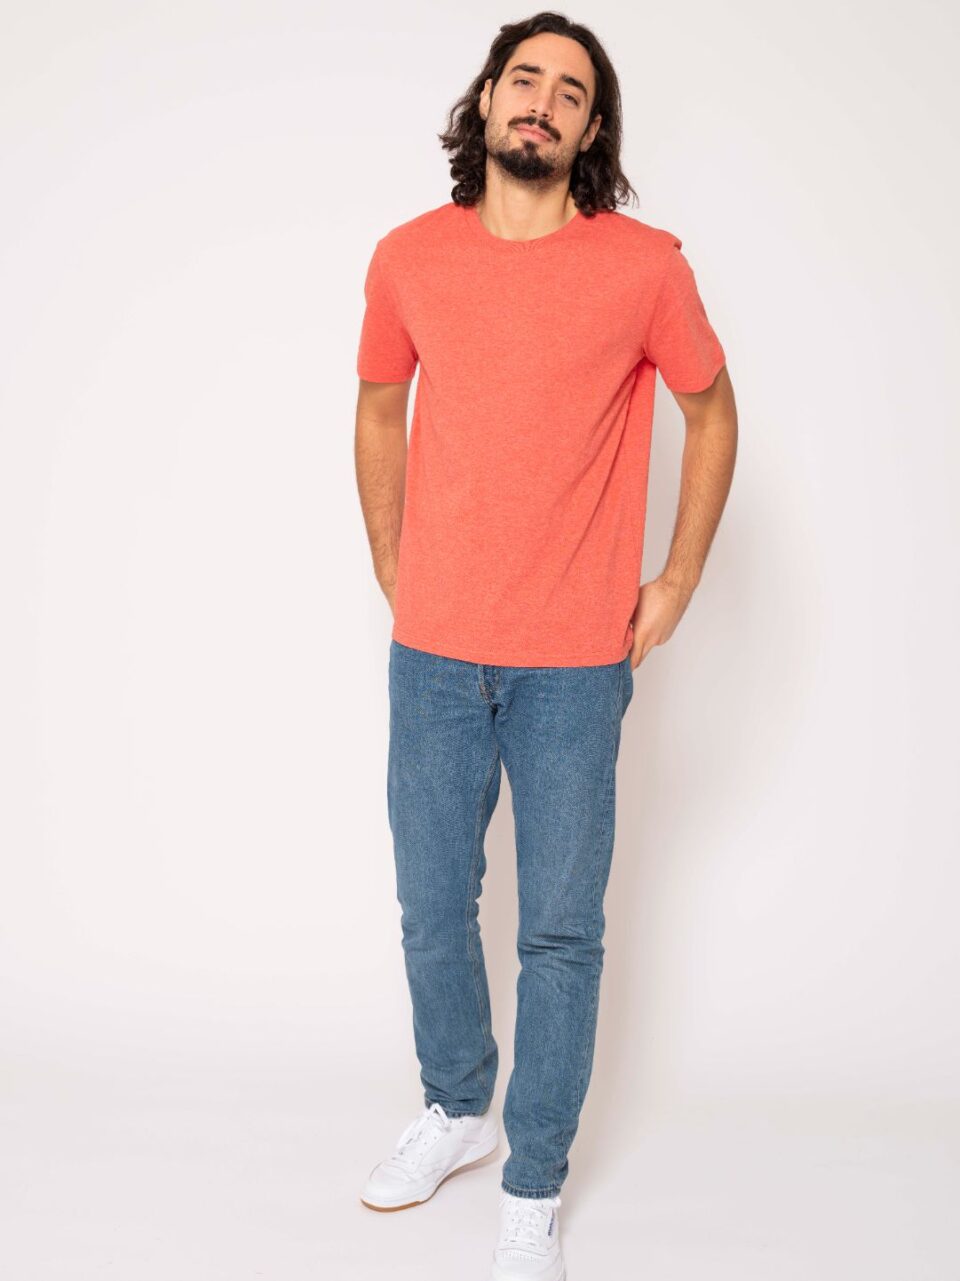 STROM_basic collection_heather poppy red_shirt